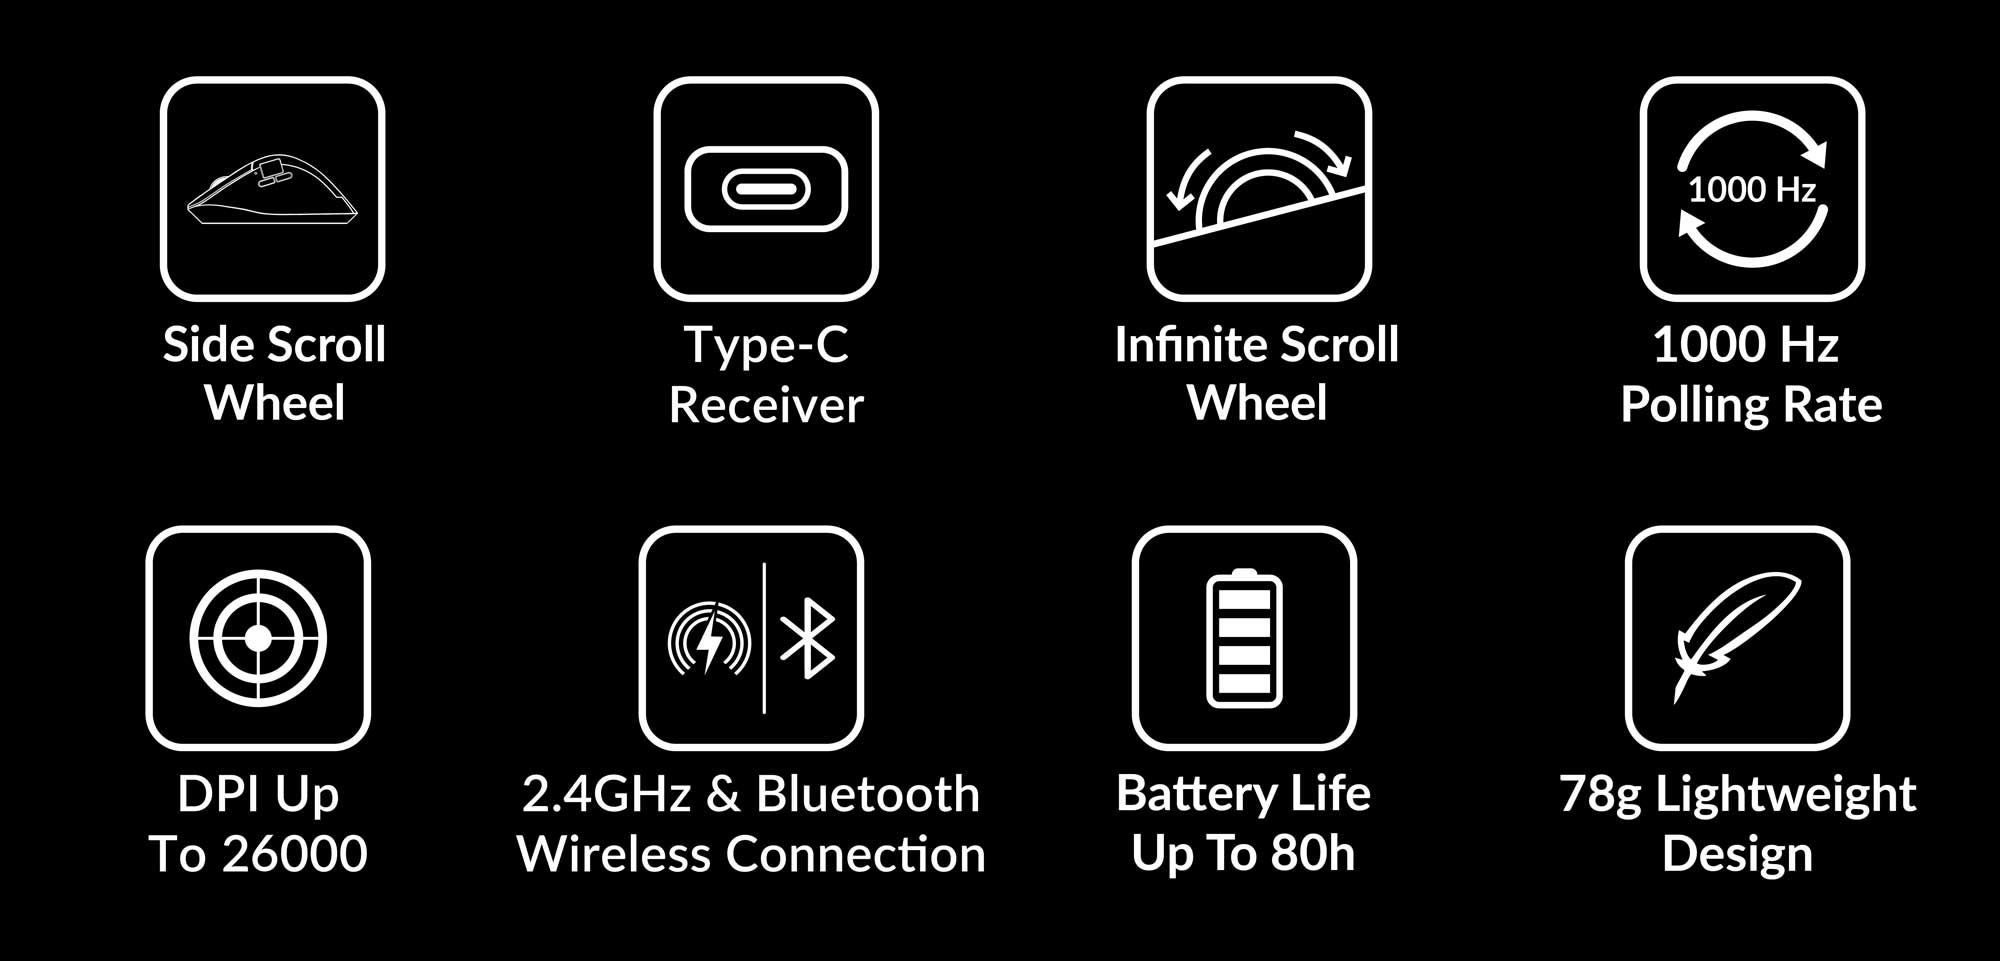 Features of Keychron M6 Wireless Mouse